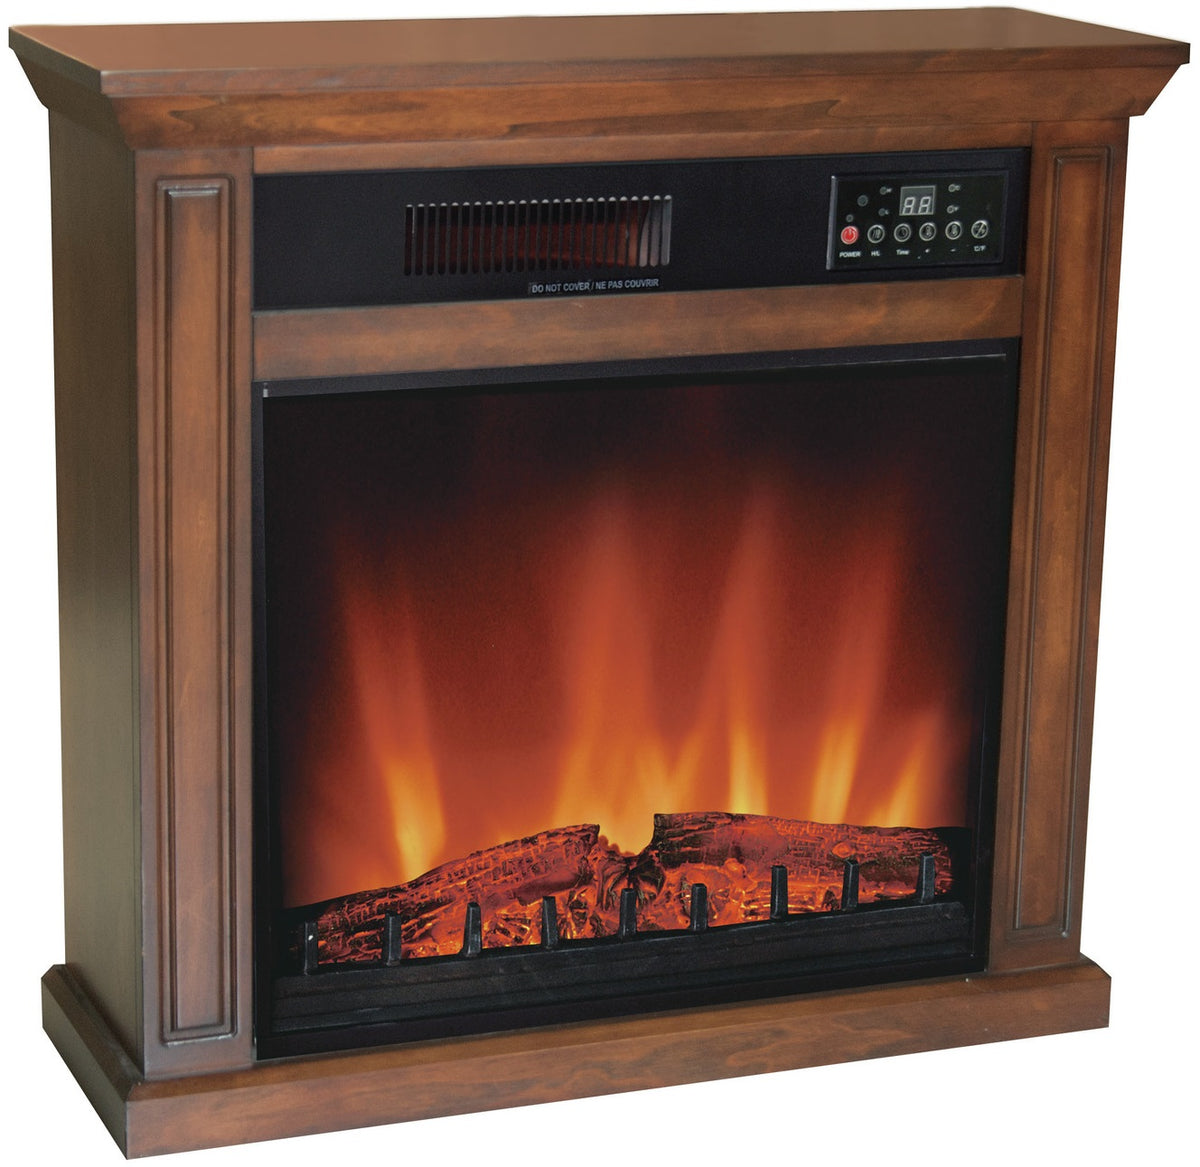 buy fireplace items at cheap rate in bulk. wholesale & retail bulk fireplace supplies store.